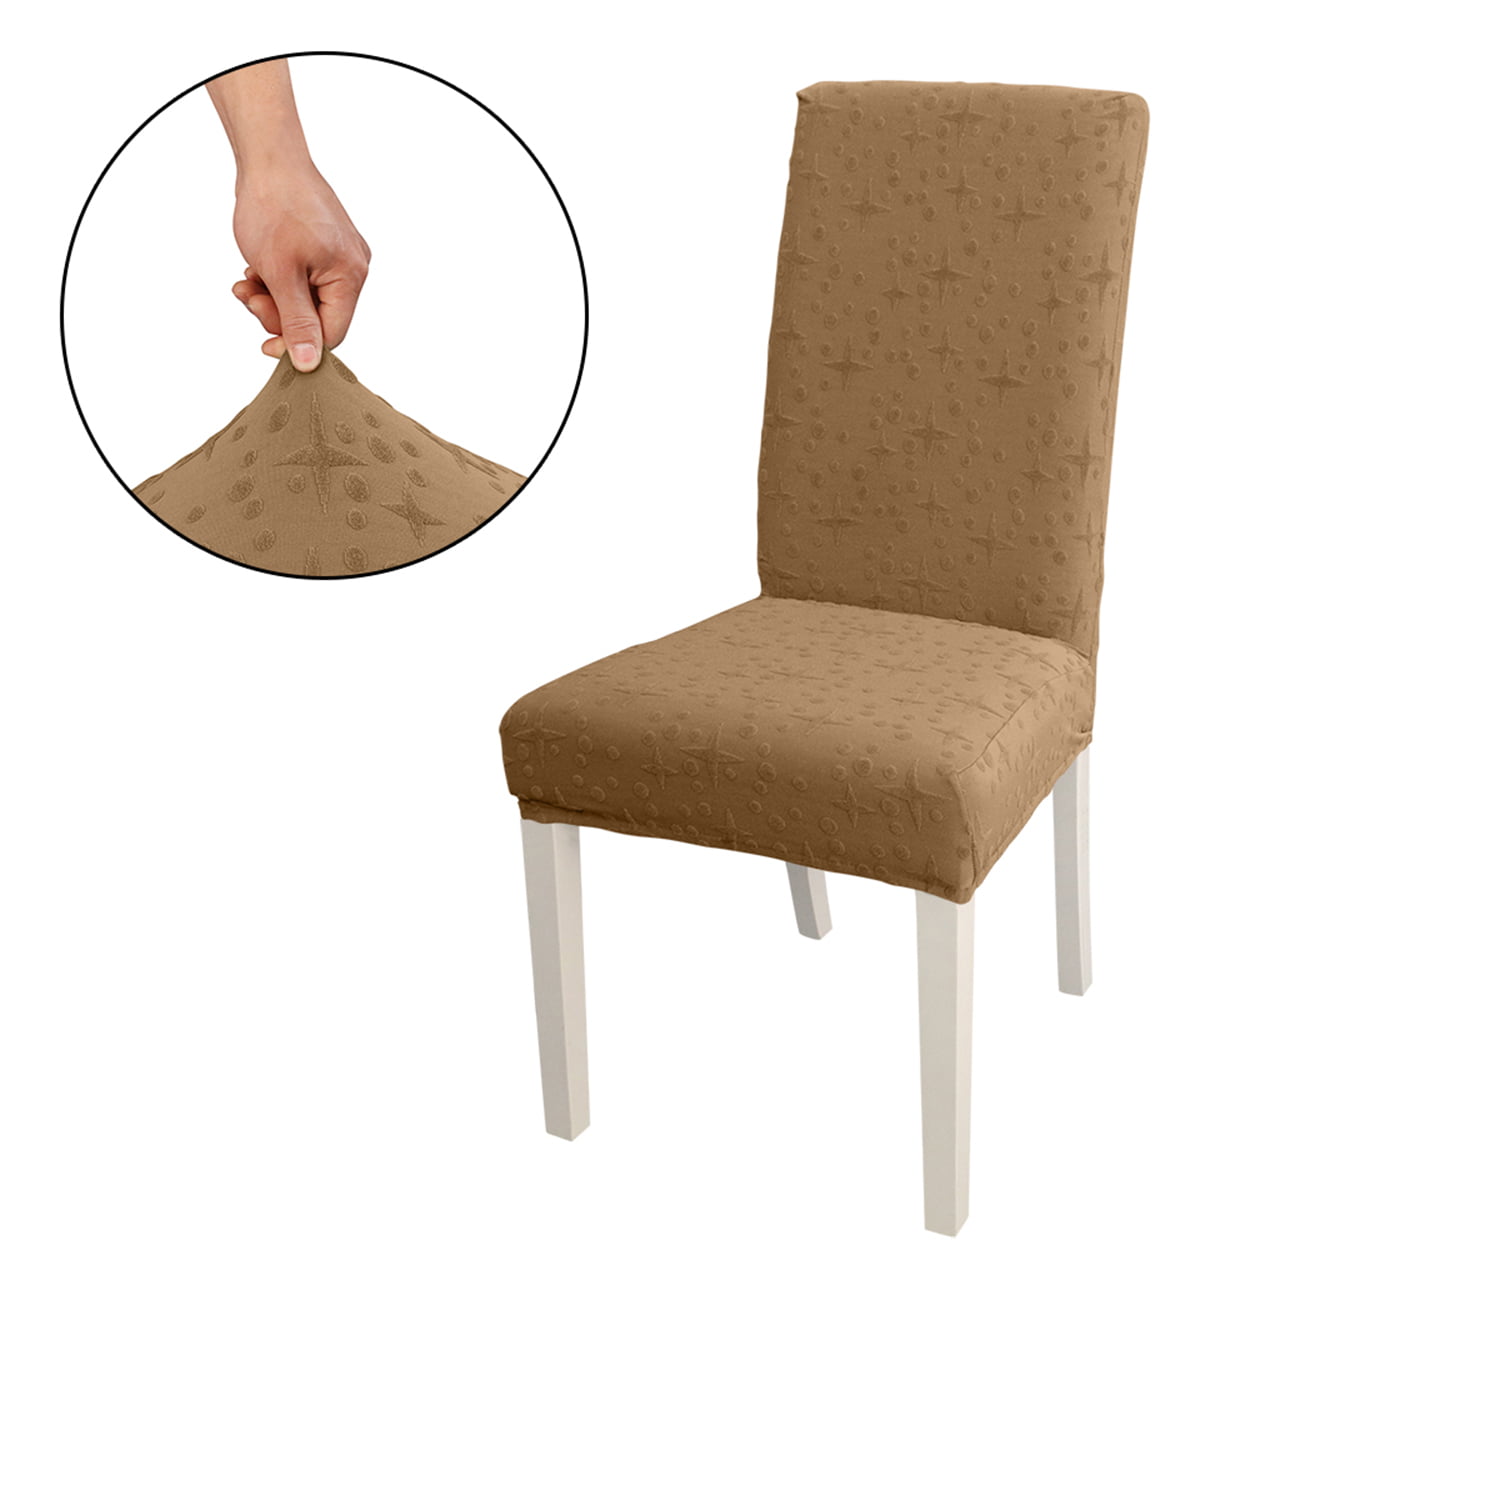 Dining Chair Covers Knit Stretch Removable Banquet Chair Slipcovers Solid 